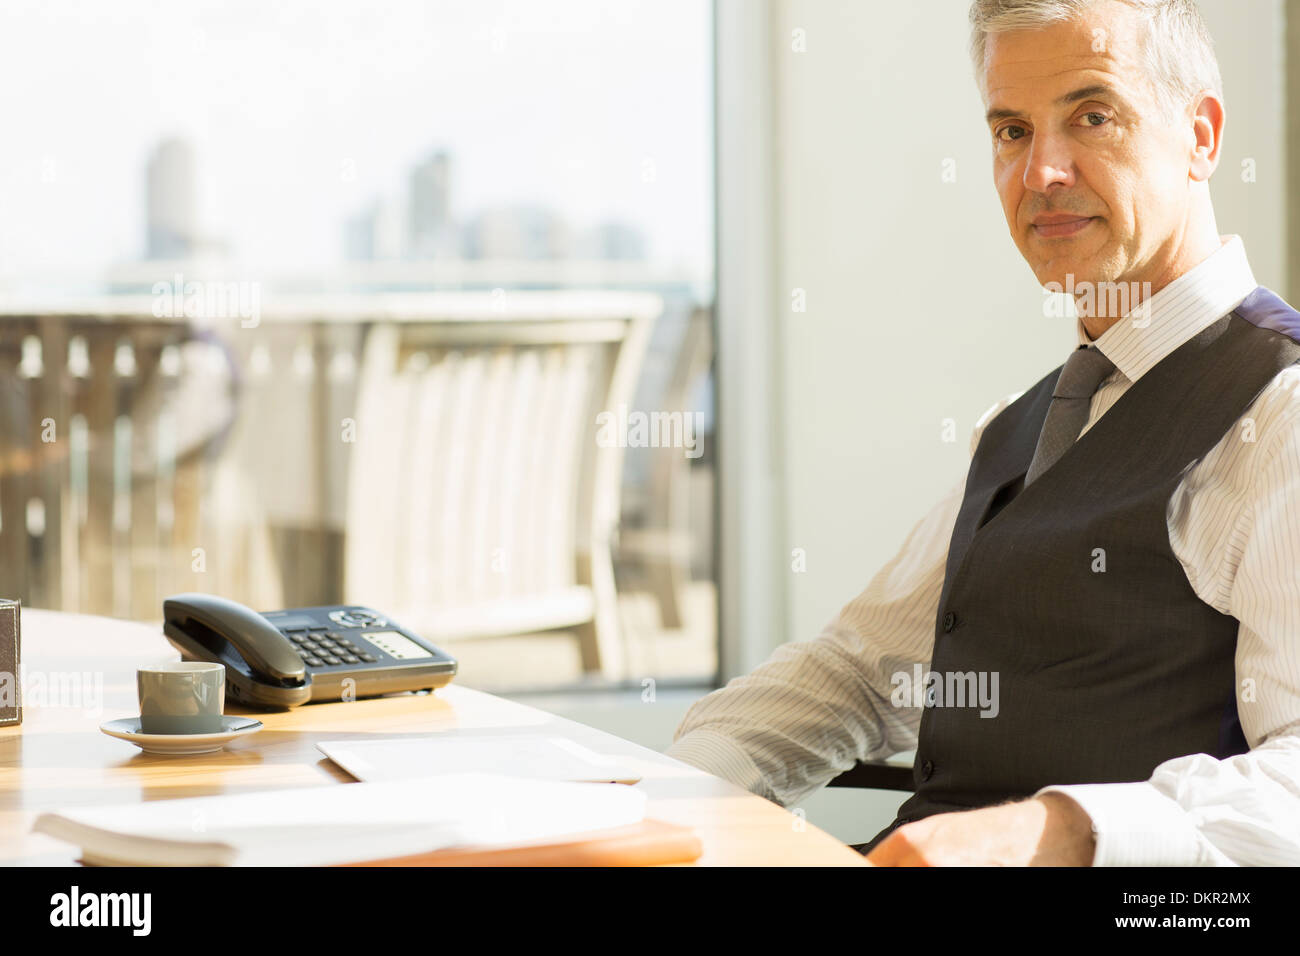 Businessman sitting at desk in office Stock Photo